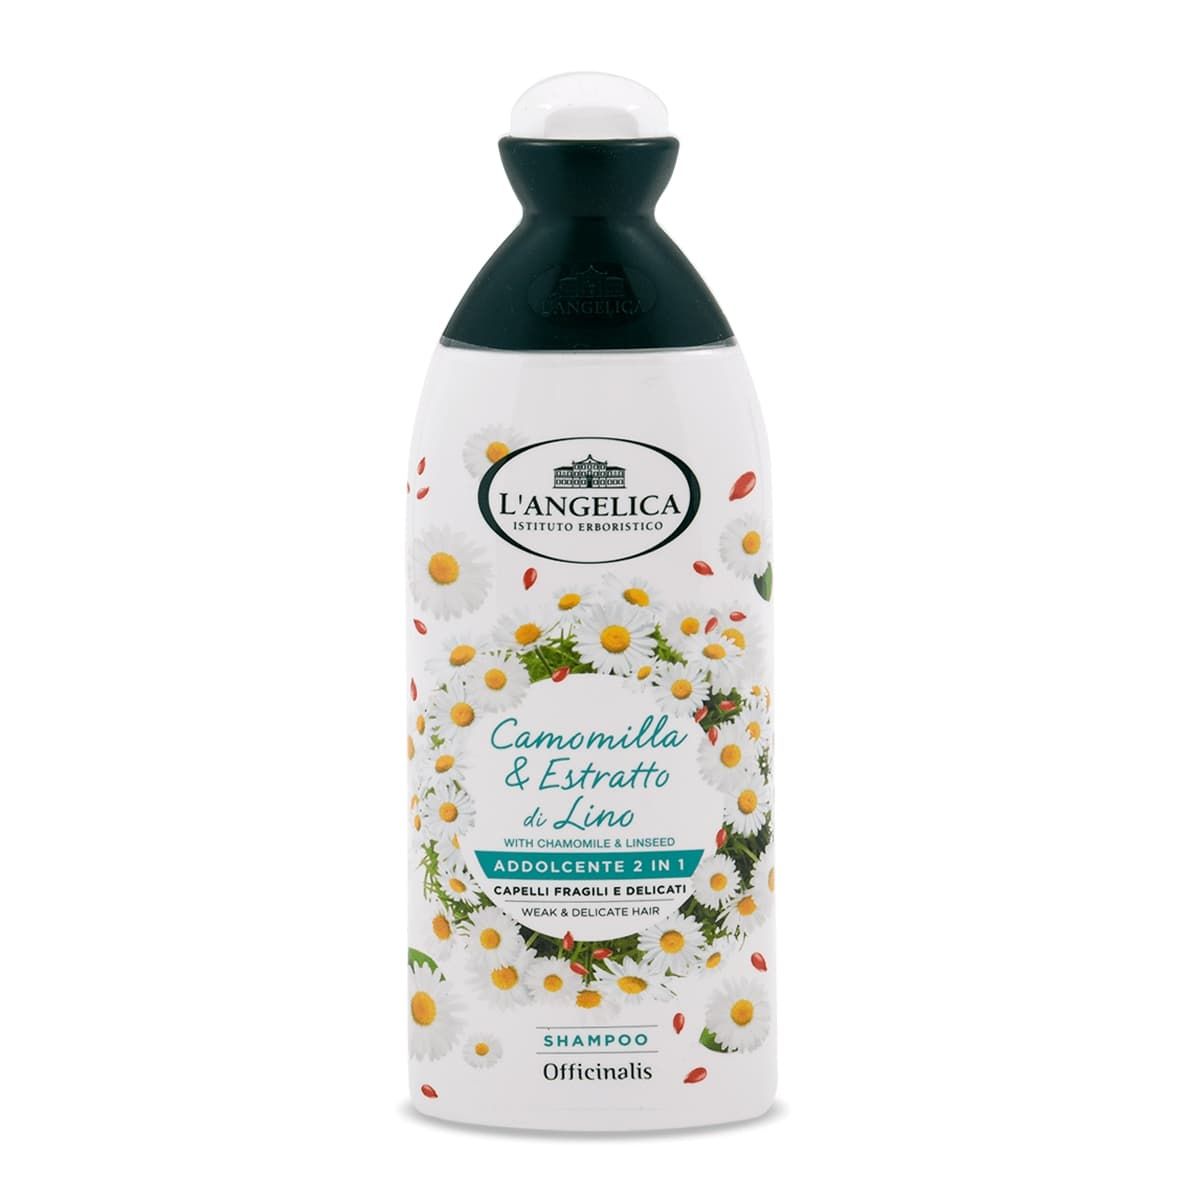 Chamomile & Linen Extract 2-in-1 Shampoo